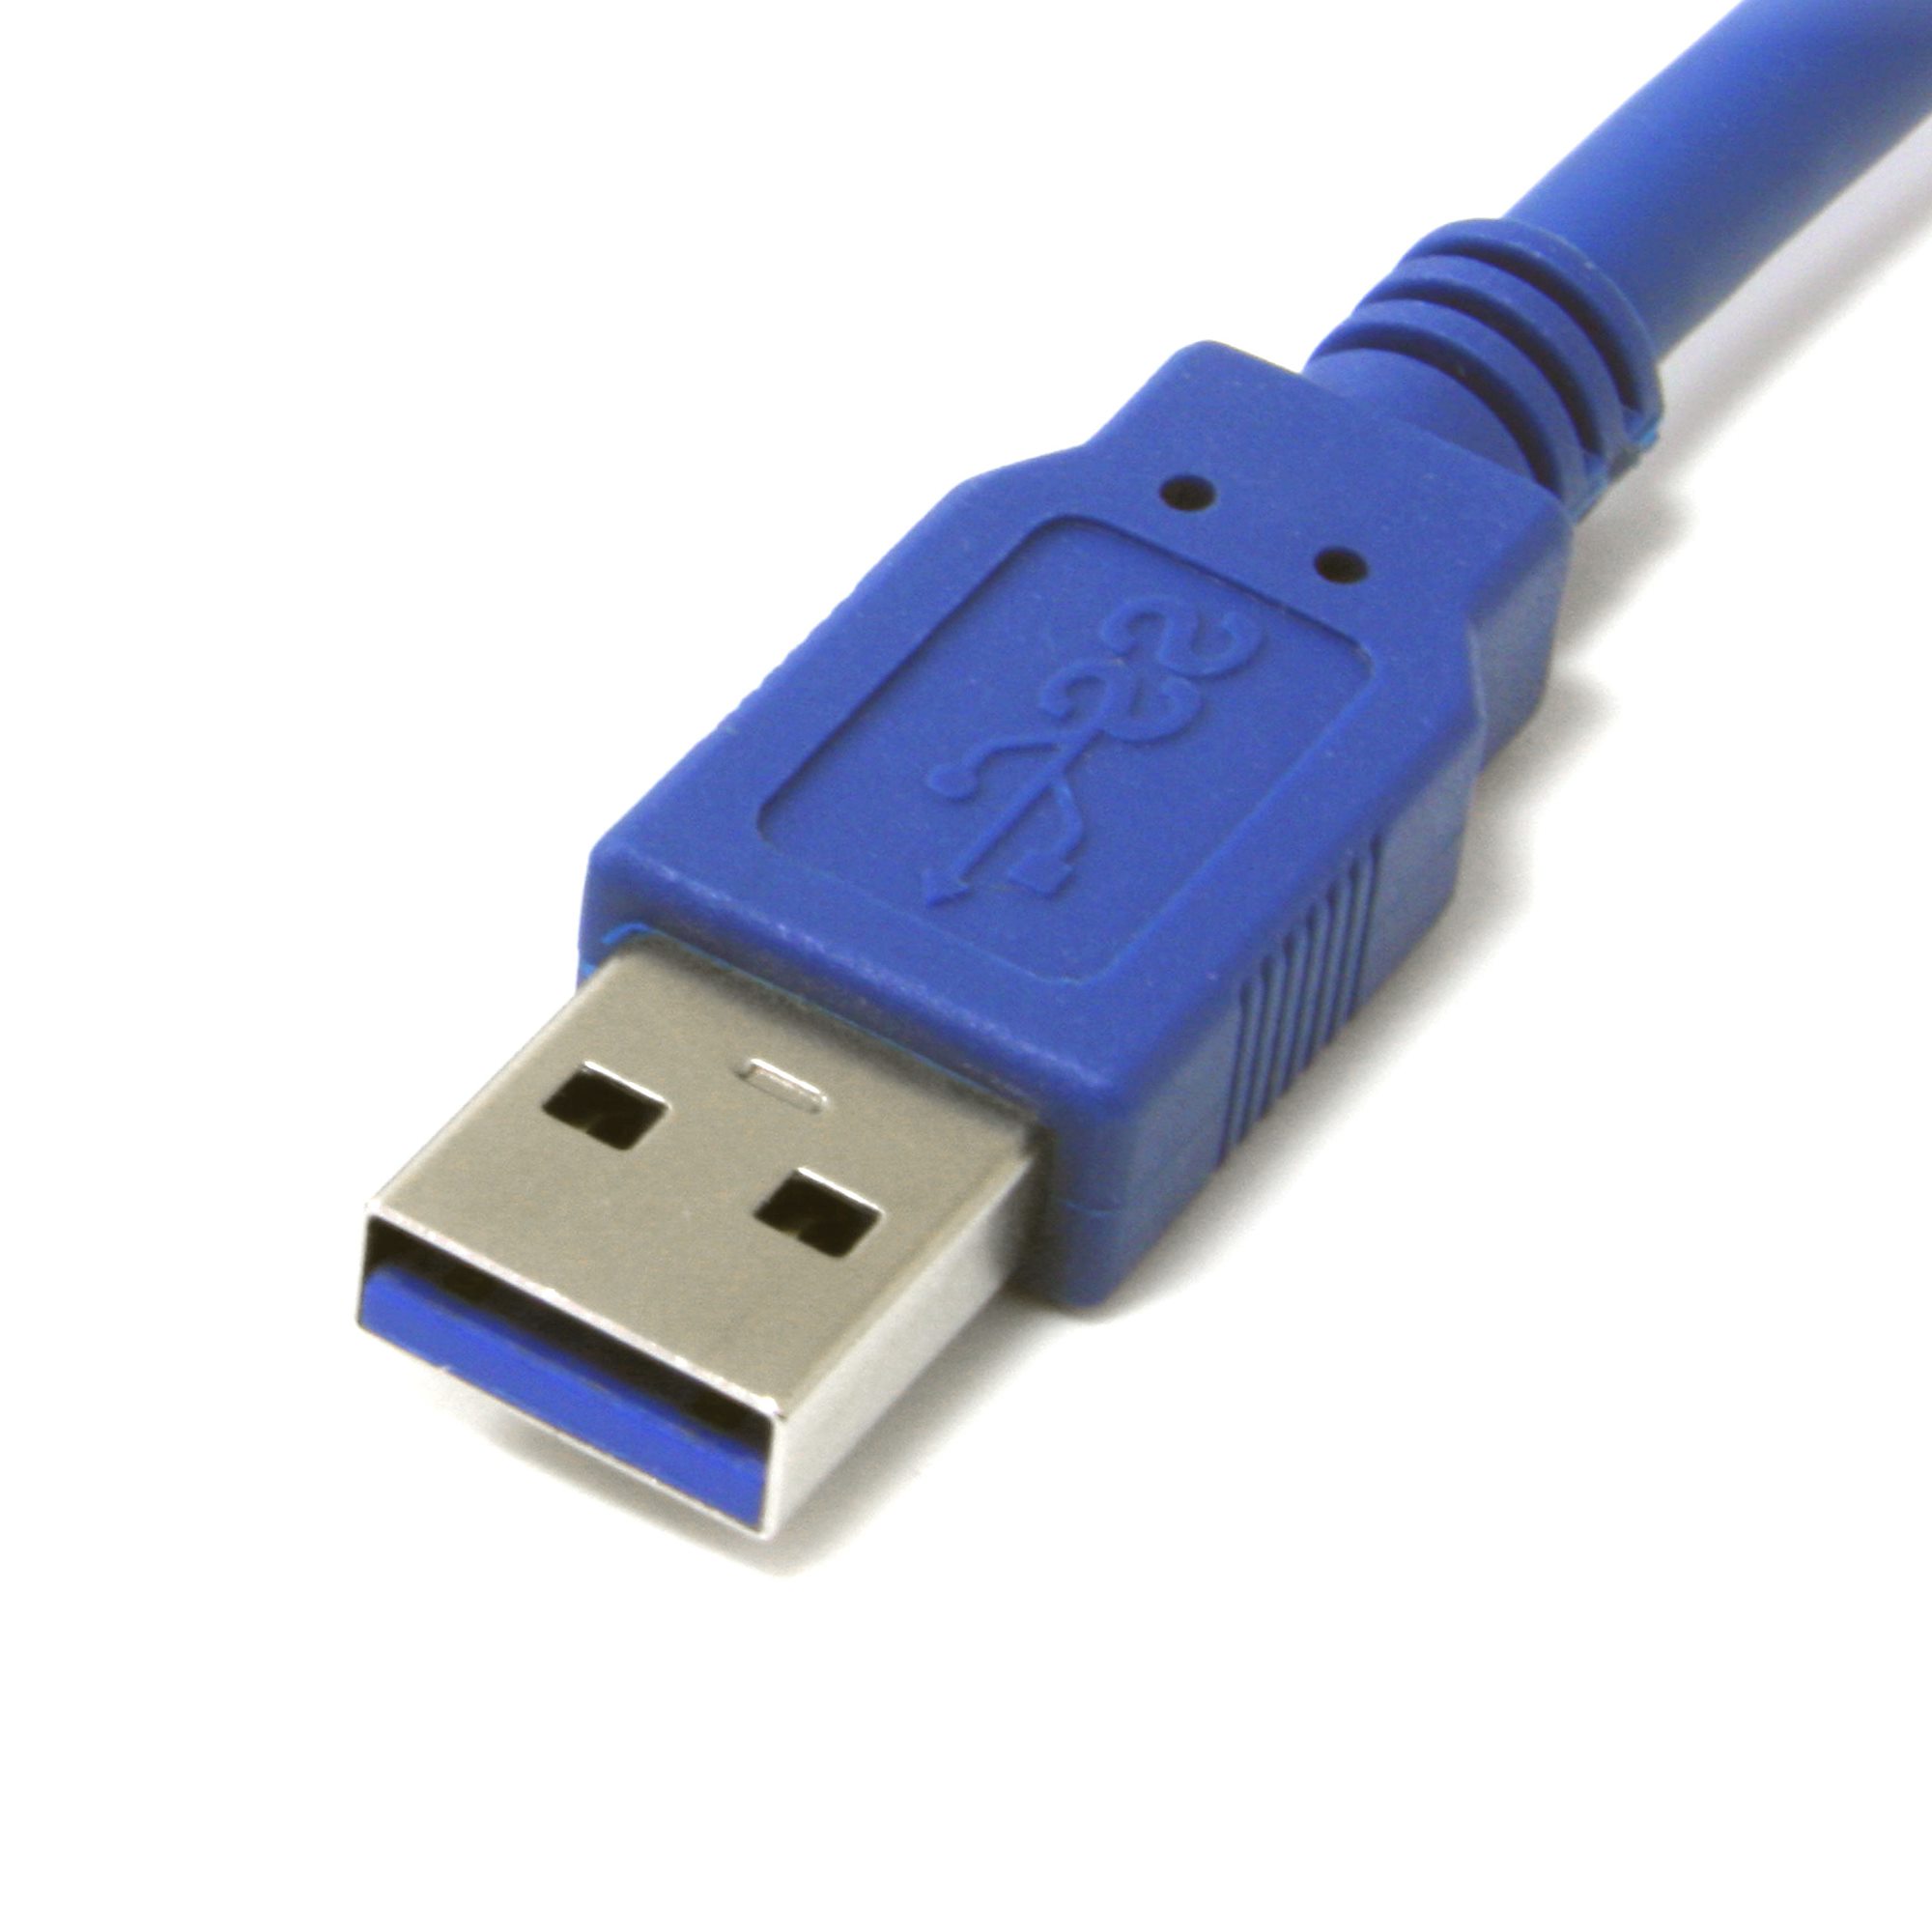 3 ft USB 3.0 Cable A to Micro B - USB 3.0 Cables